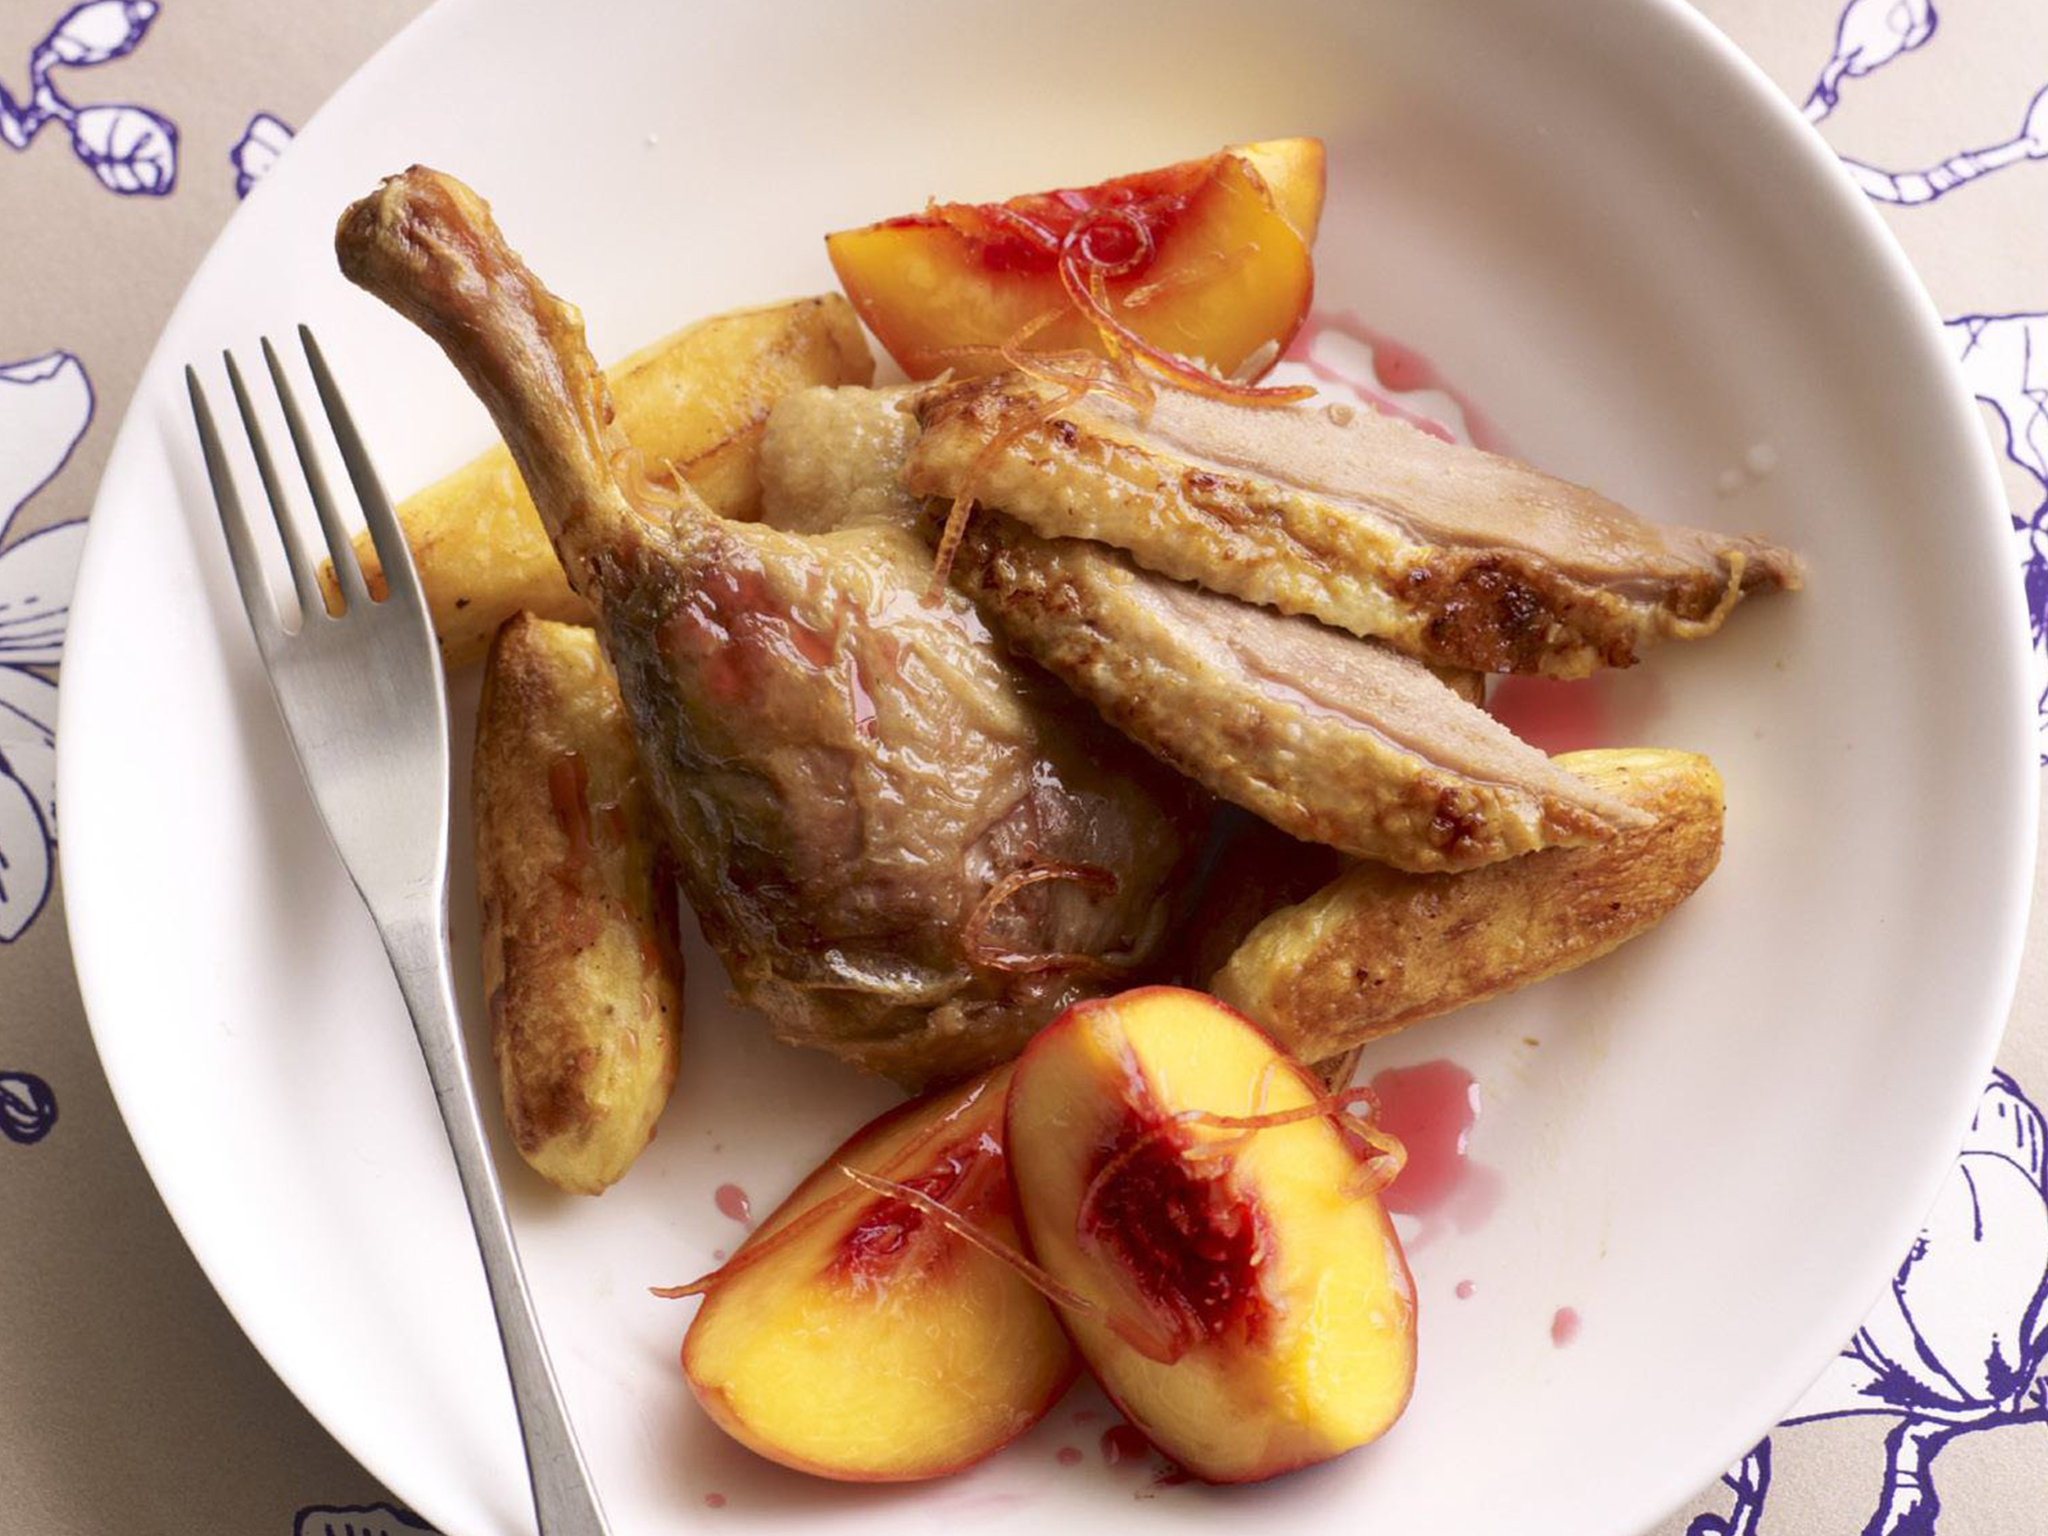 Slow-roasted duck with citrus peaches